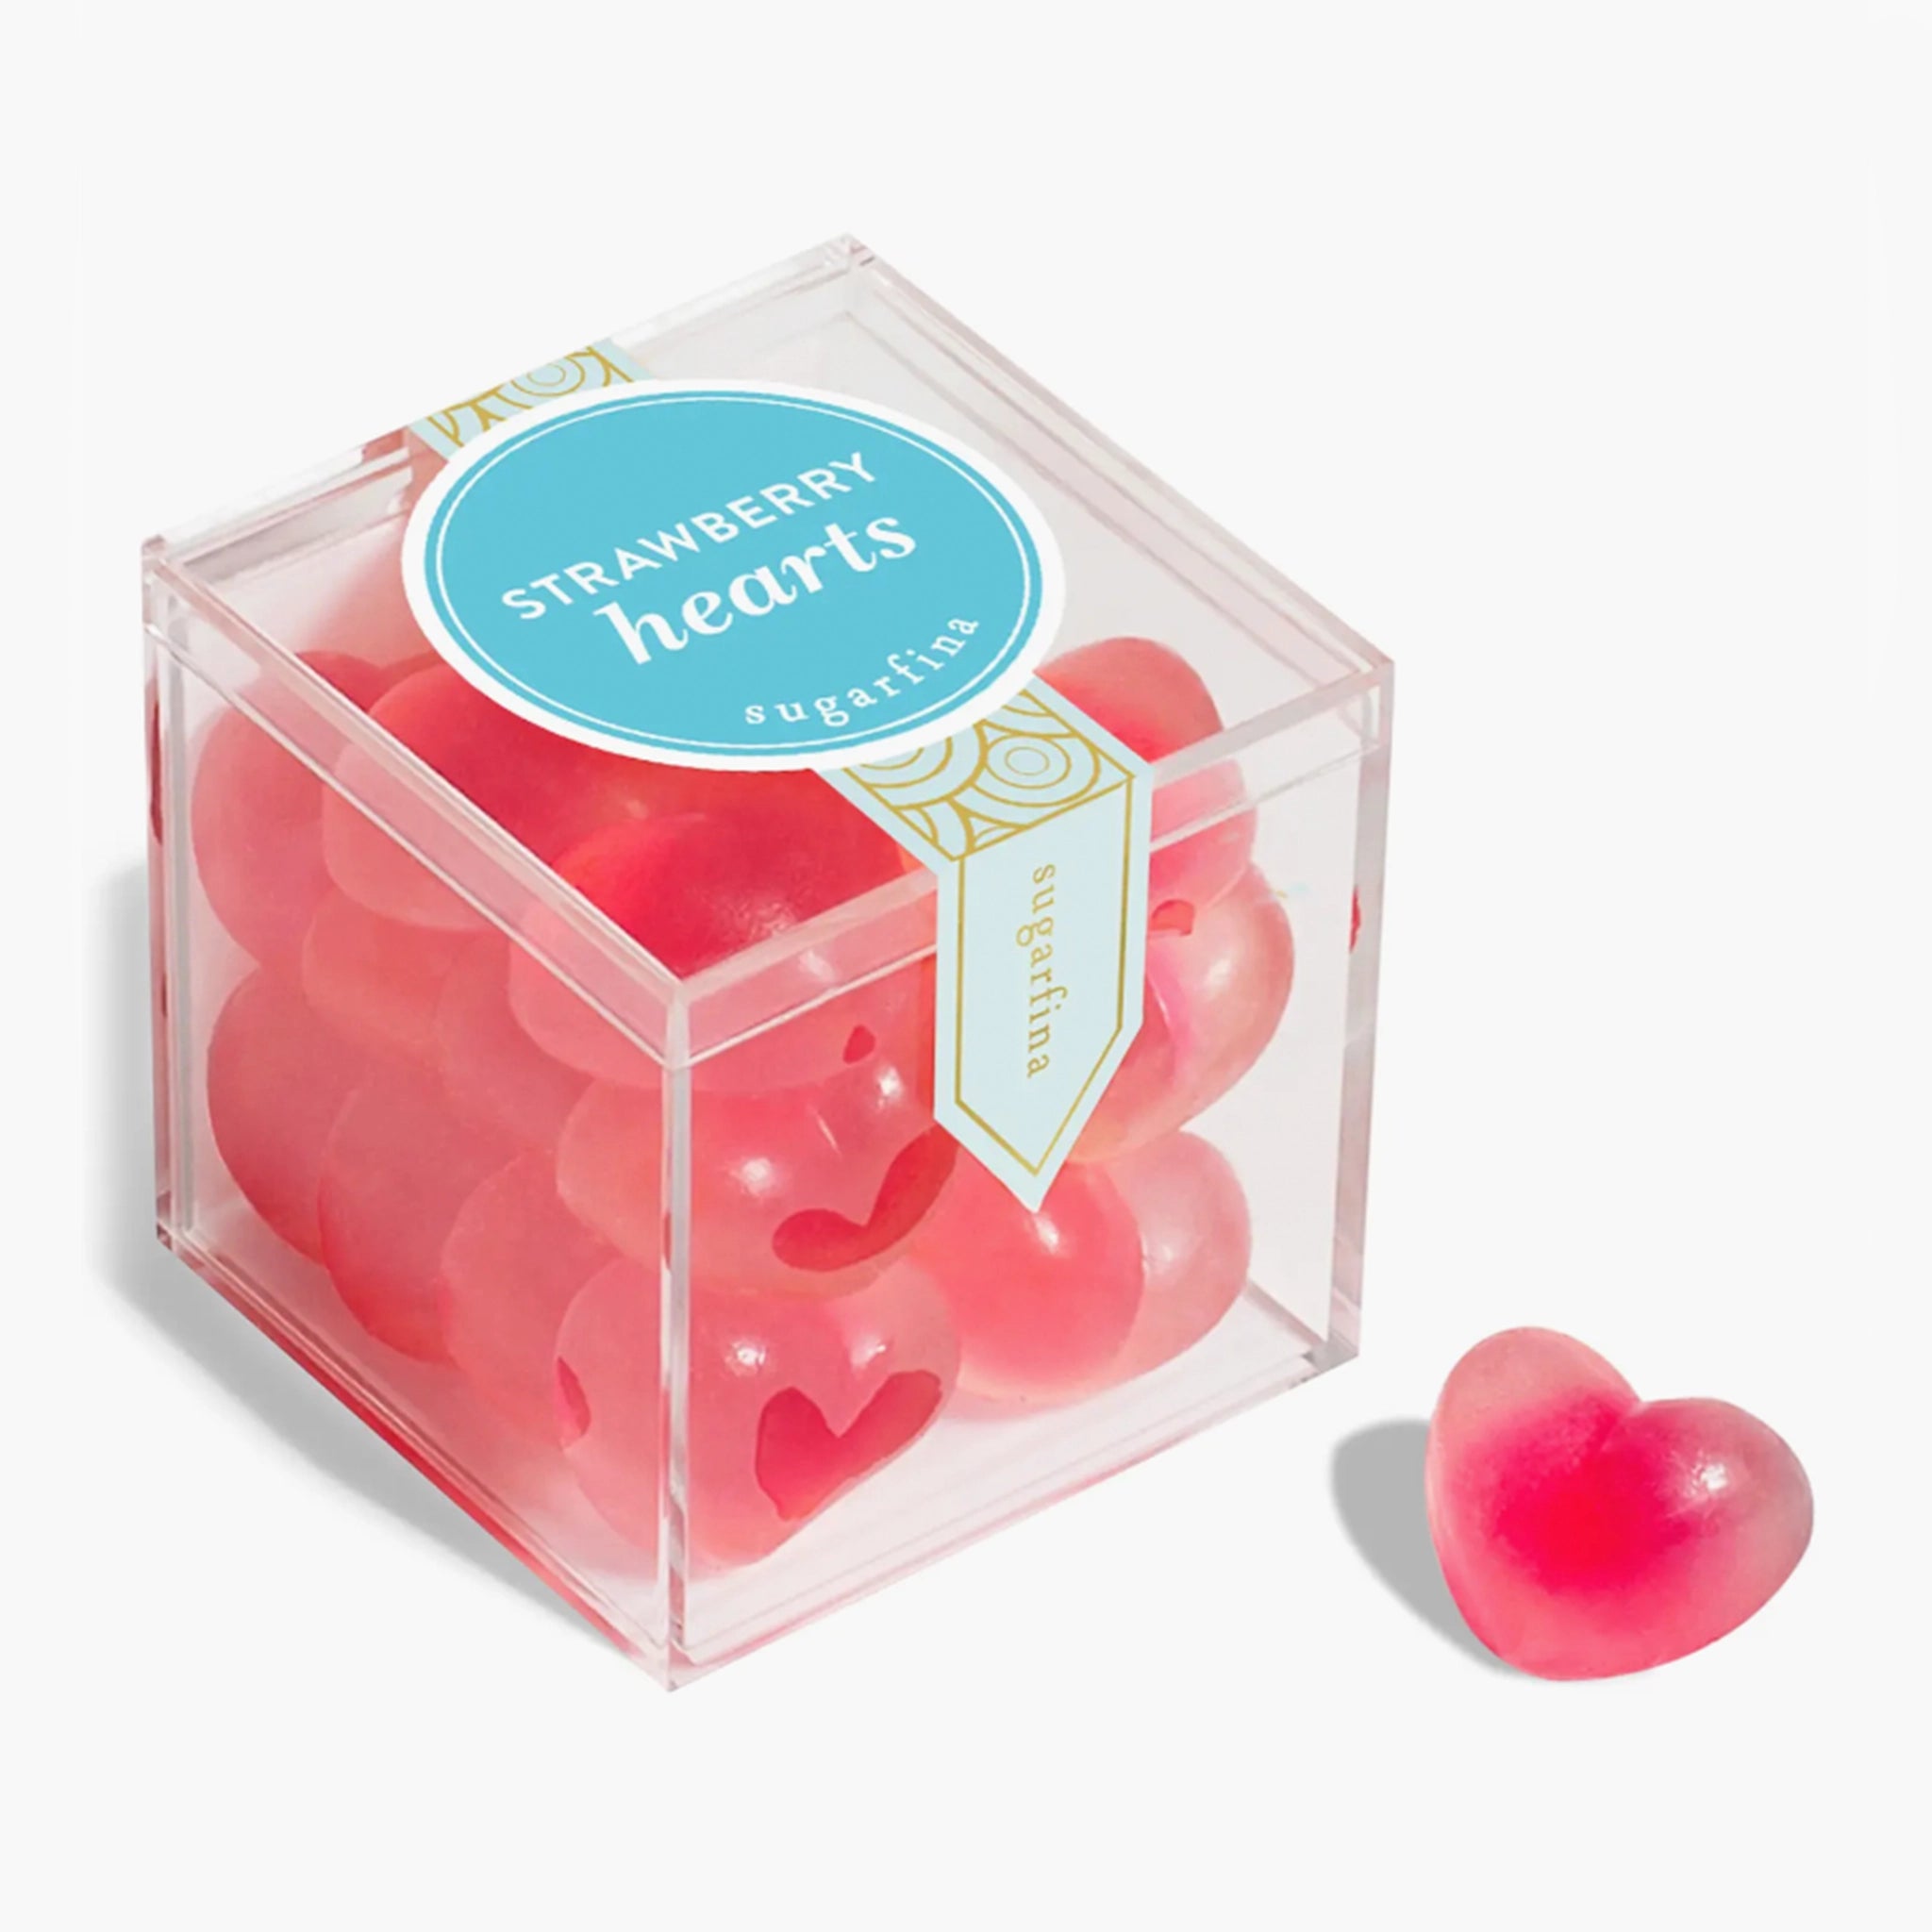 In front of a white background is the birds eye view of a clear, plastic cube. There is a thin, blue and gold sticker that moves vertically down the middle of the lid. In the middle is a round blue sticker with white text that reads ‘strawberry hearts.’ The cube is filled with bright pink gummies.